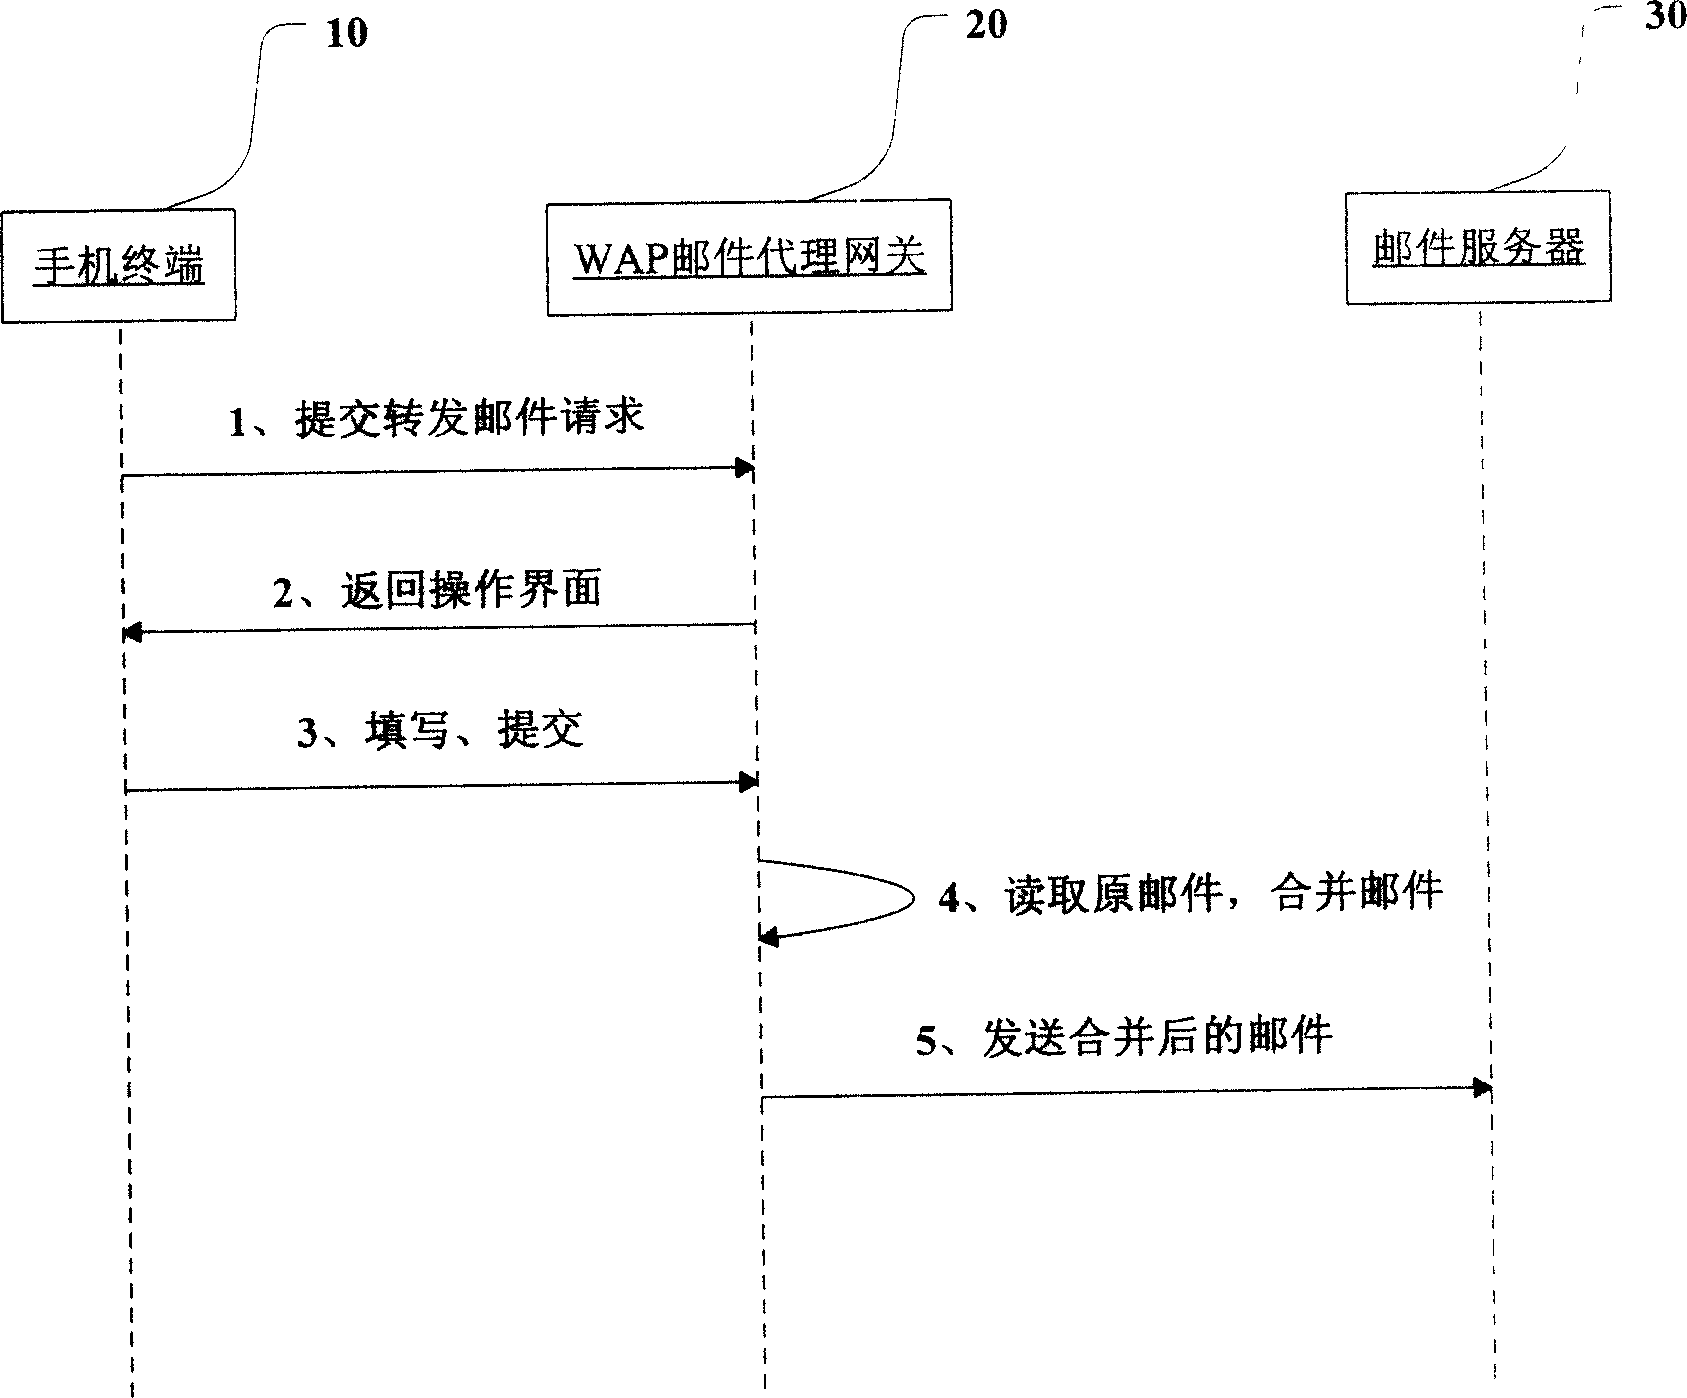 Mail transfering system and method based on WAP protocol